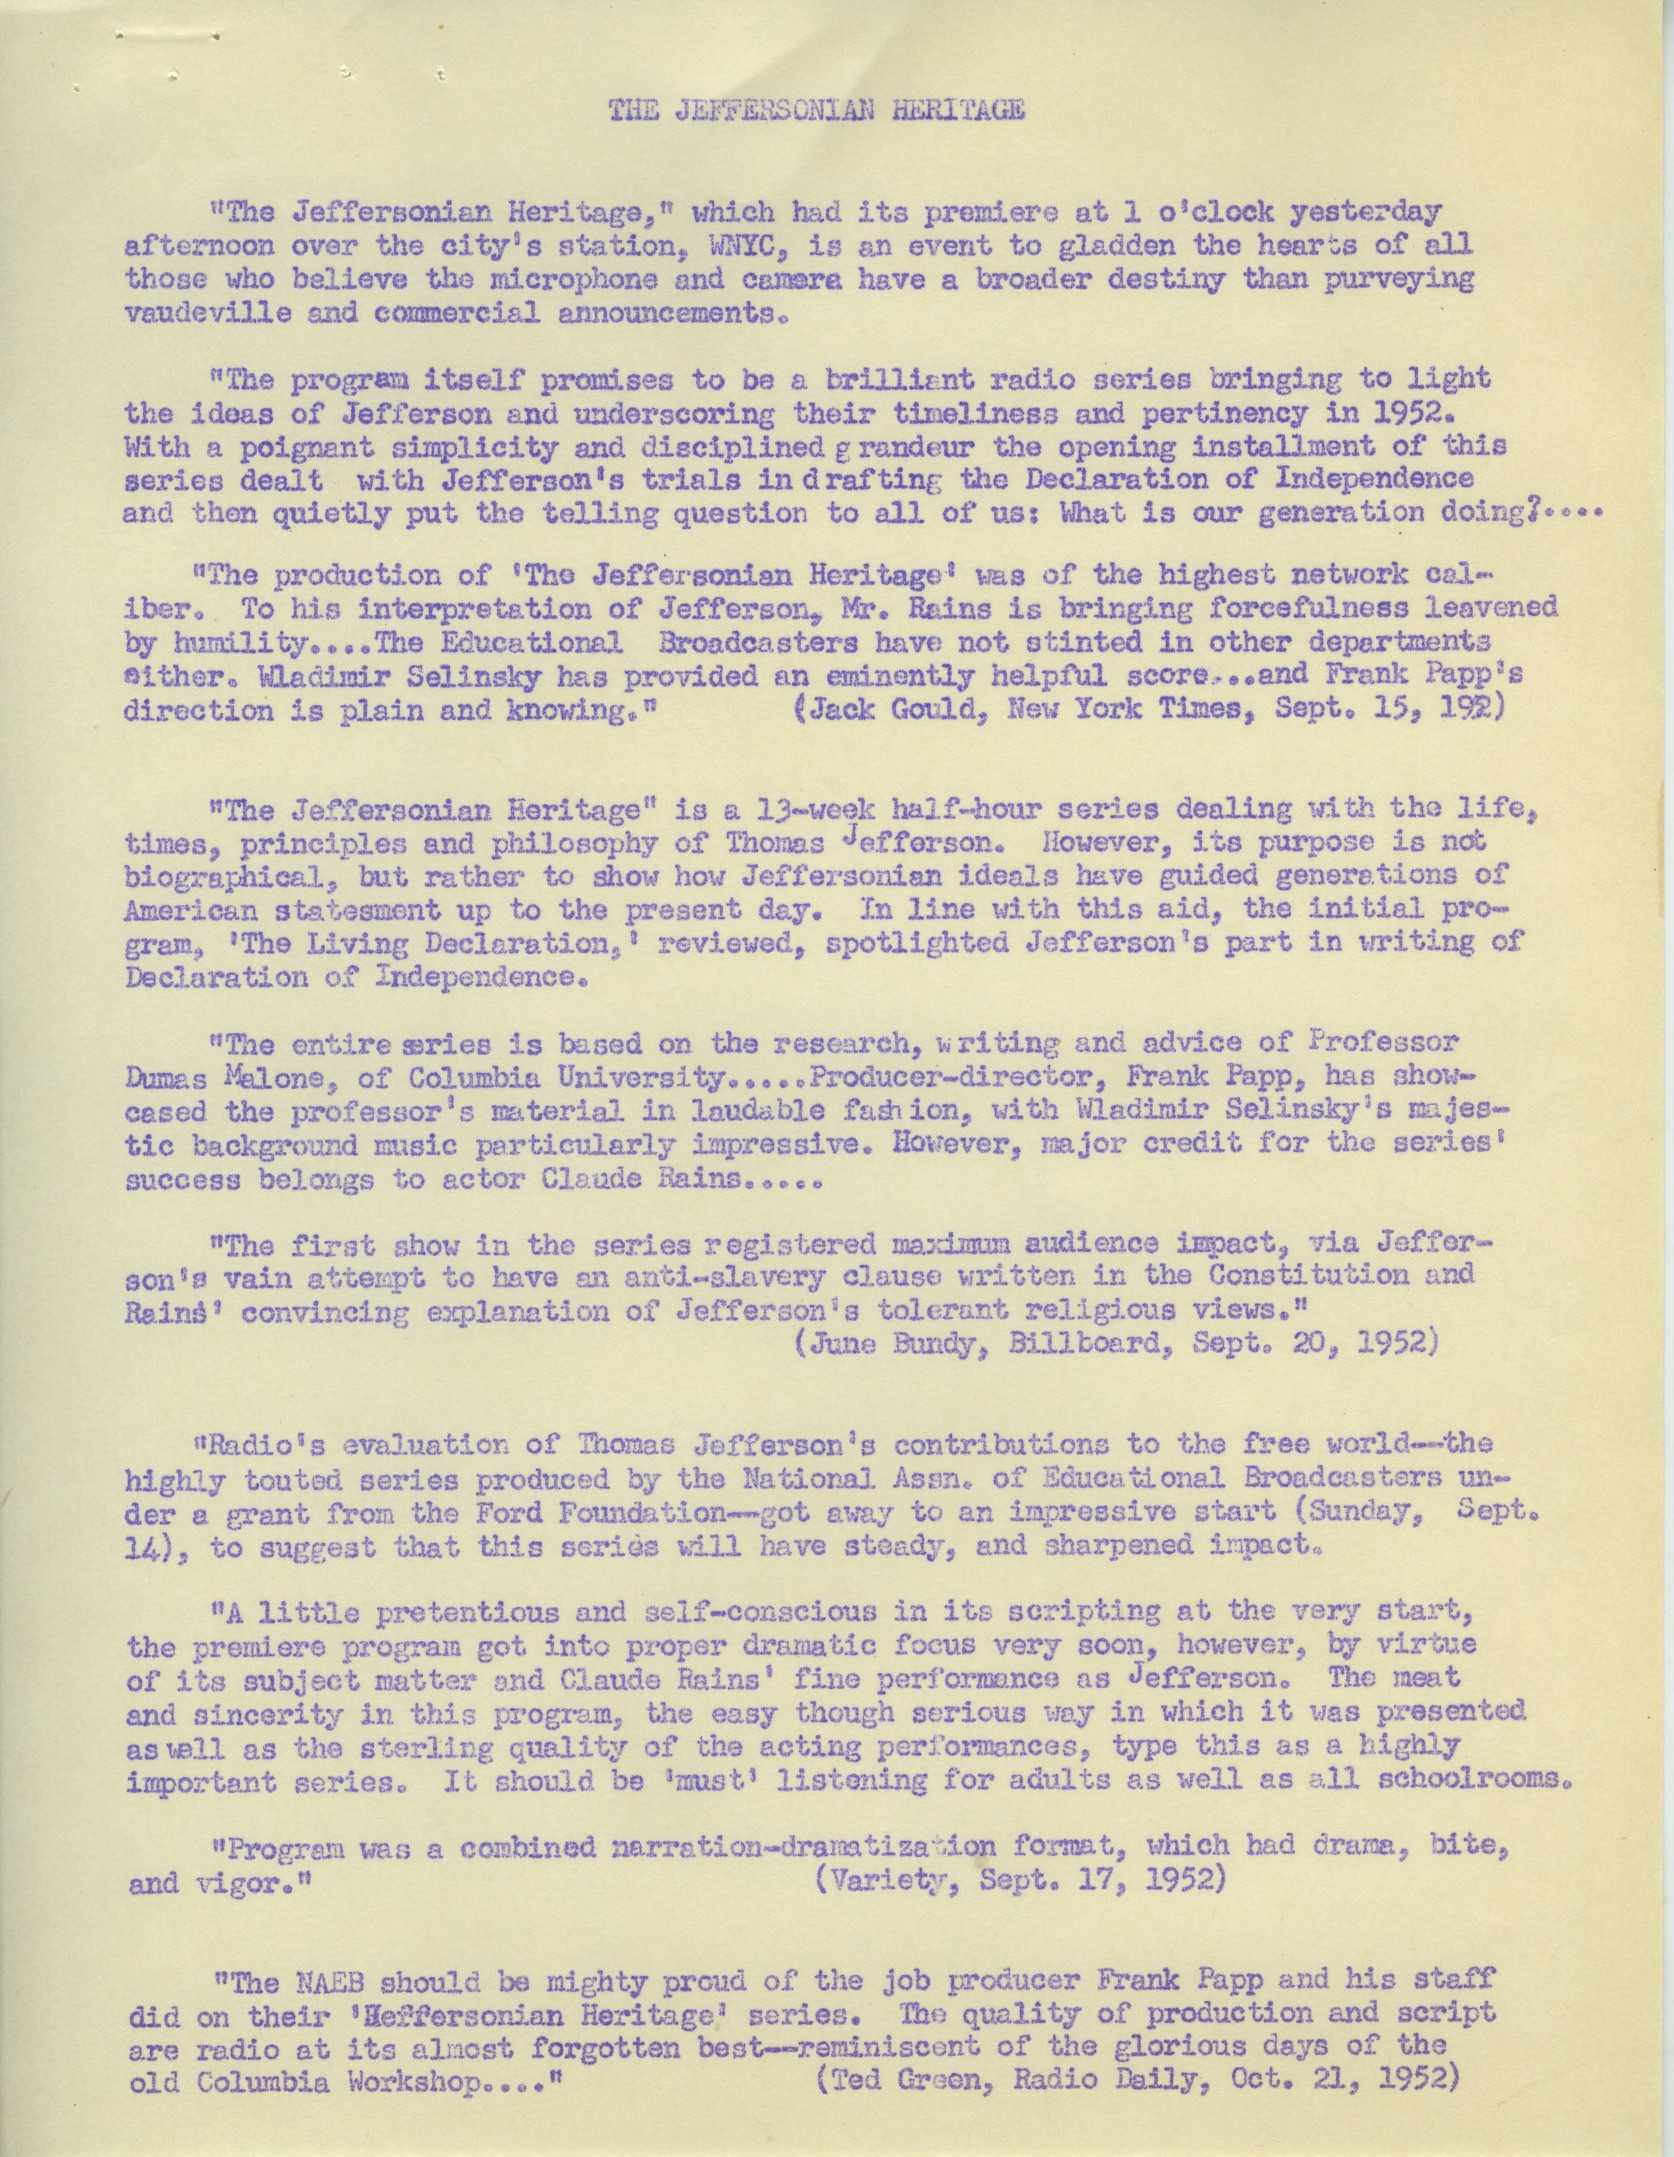 Press excerpts and highlights for The Jeffersonian Heritage. From a [folder of promotional materials about the show](//document/naeb-b072-f02), available at Unlocking the Airwaves.